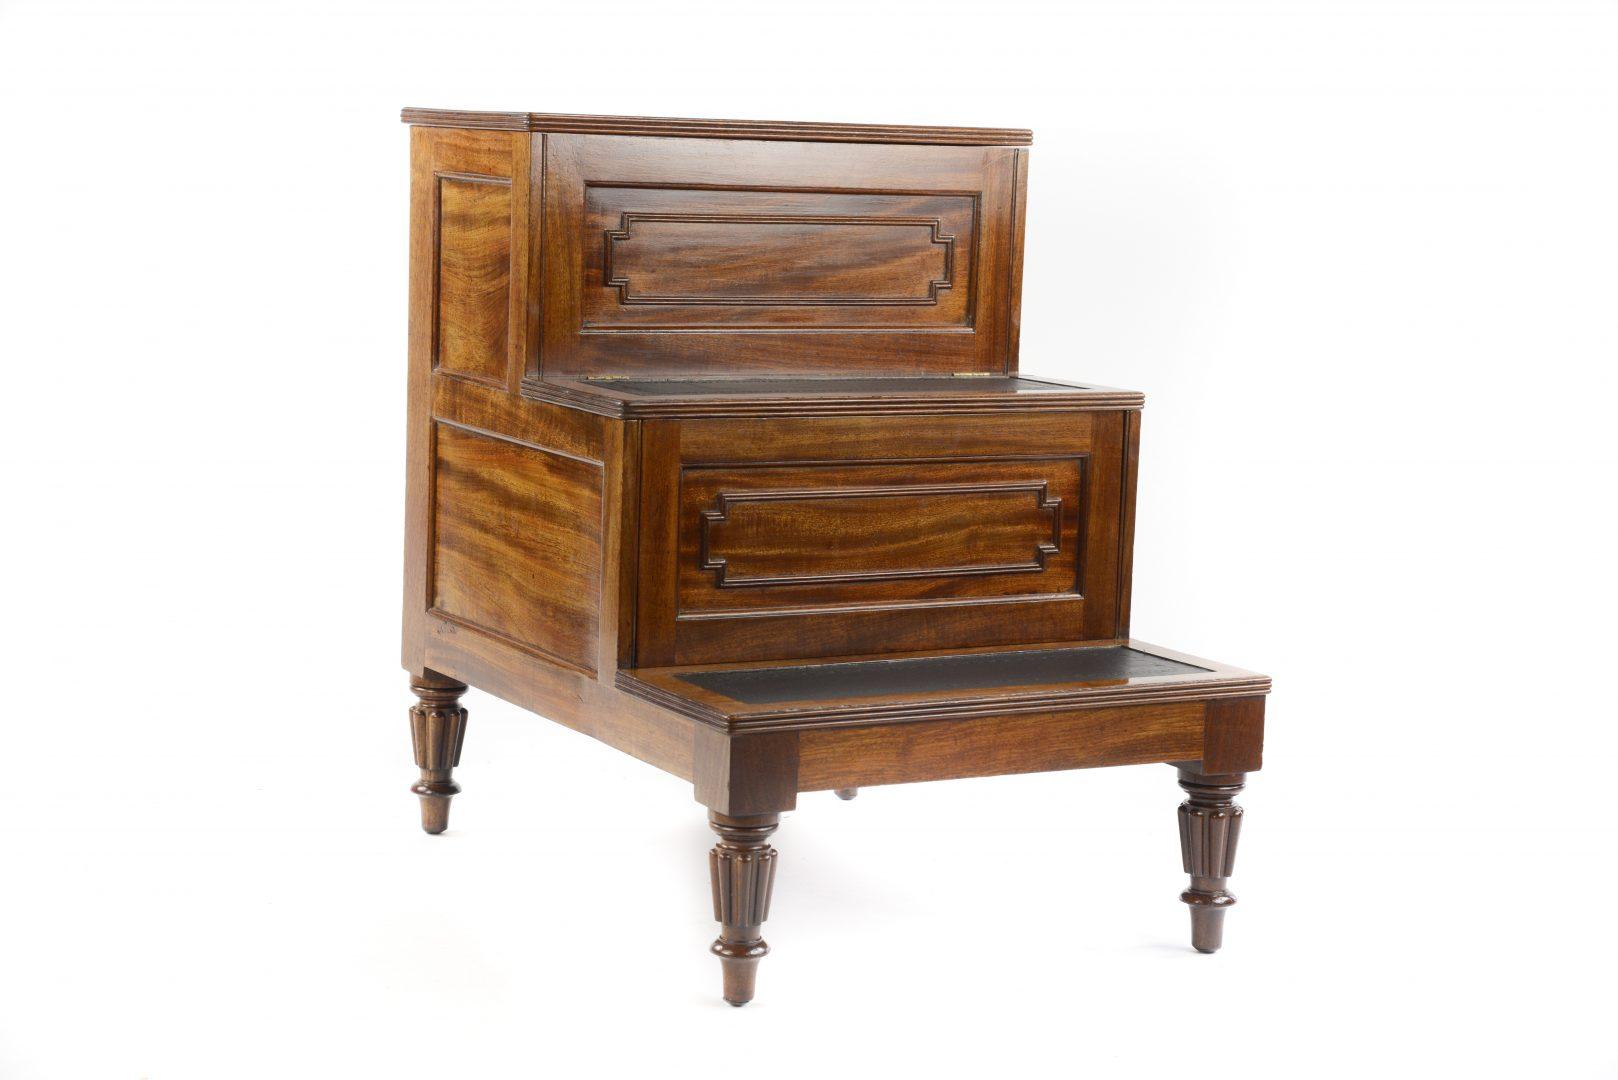 Early 19th Century George iv Mahogany Stepped Commode, Attributed to Gillows of Lancaster